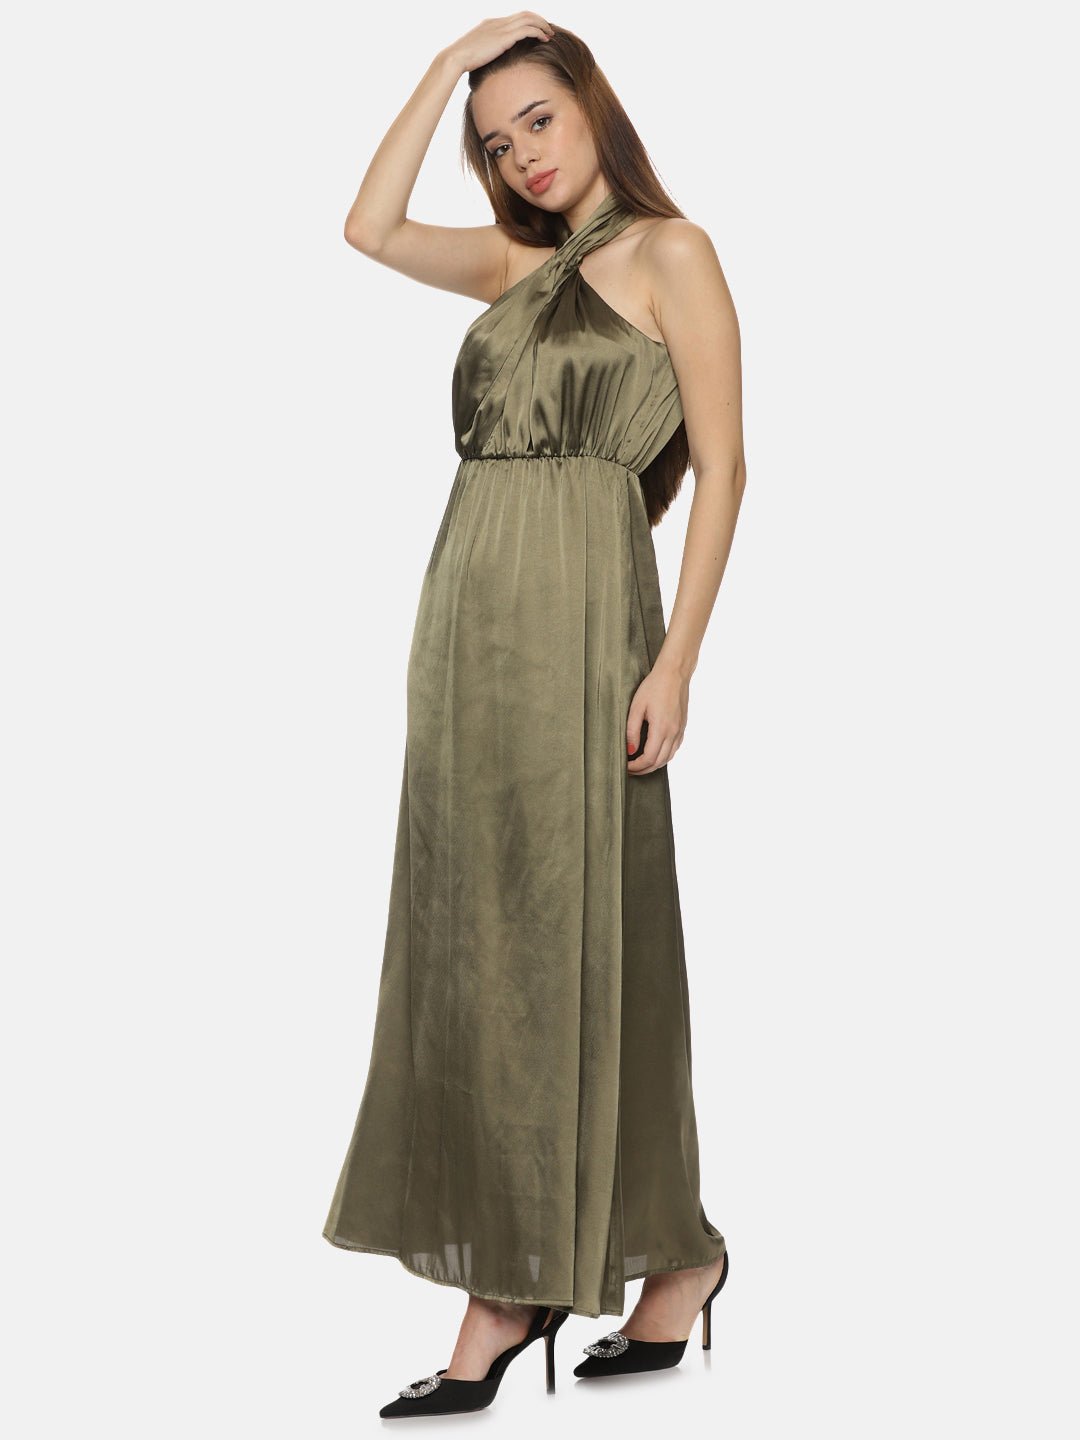 Buy Olive Printed Solid Satin Fabric | Halter Maxi Dress Online In India